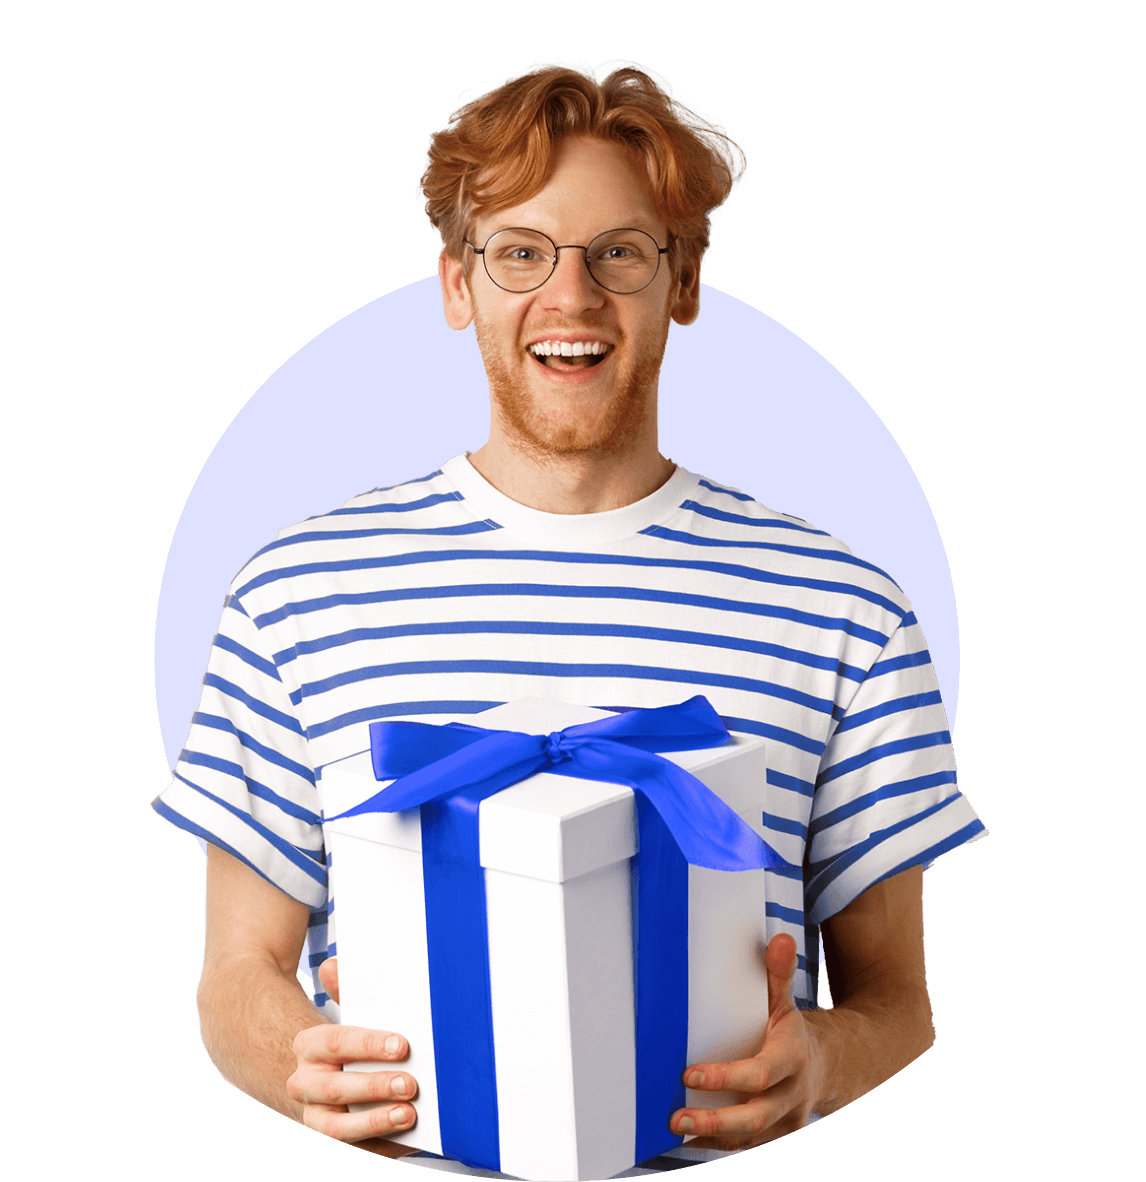 Man in blue-striped t-shirt holding a white gift box with a blue ribbon